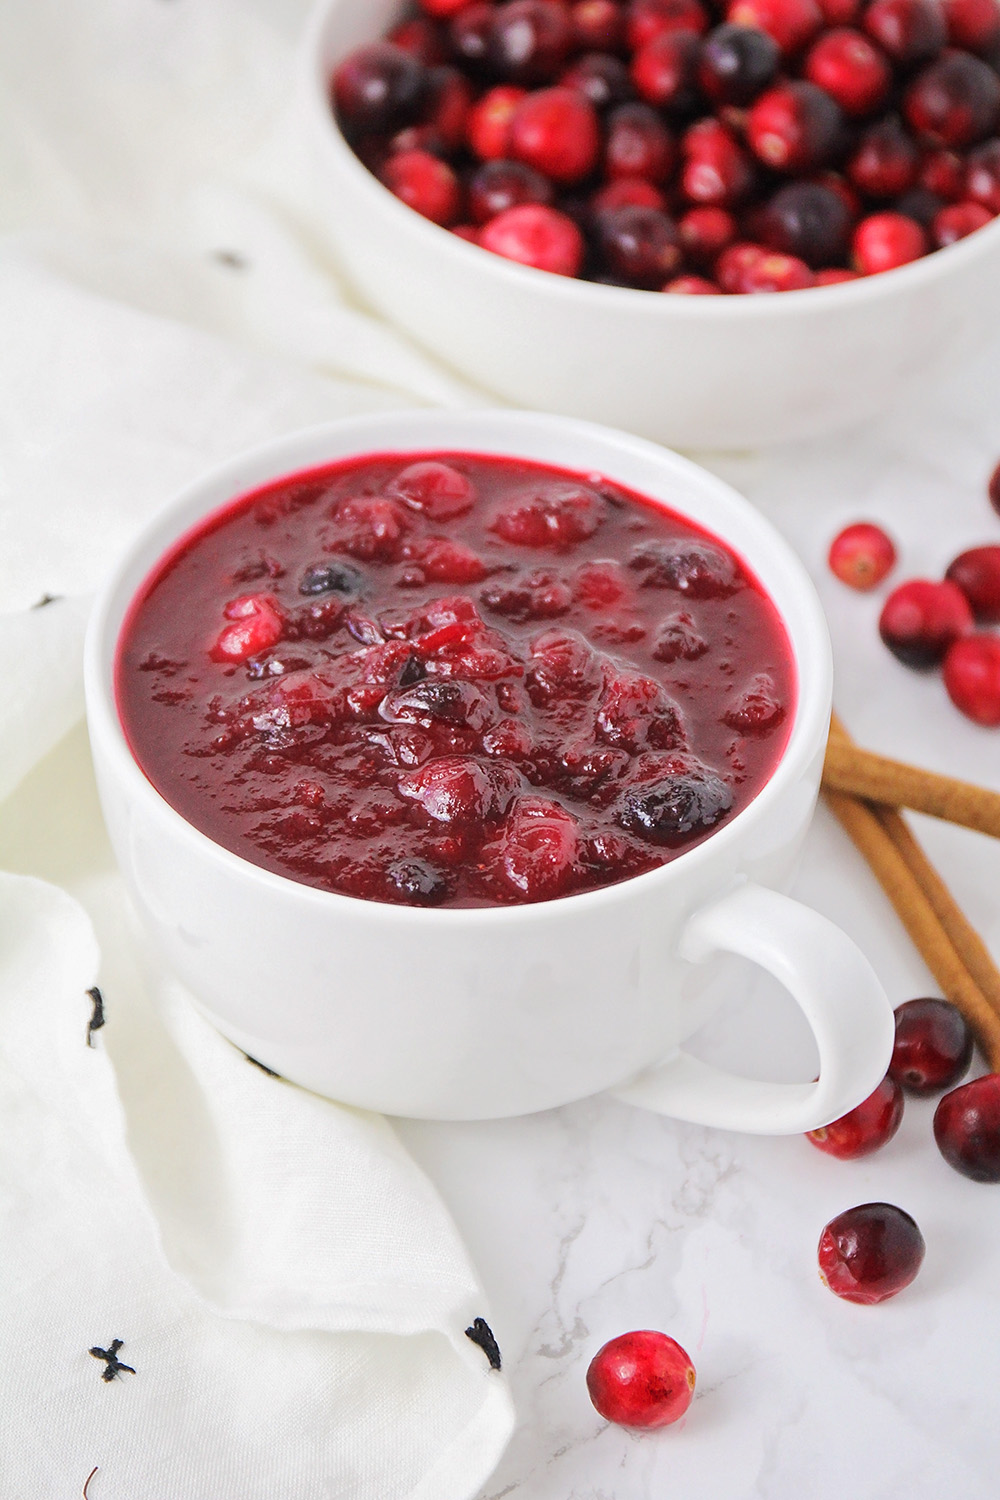 This delicious homemade cranberry sauce is so sweet, tangy, and flavorful, and way better than the canned stuff!